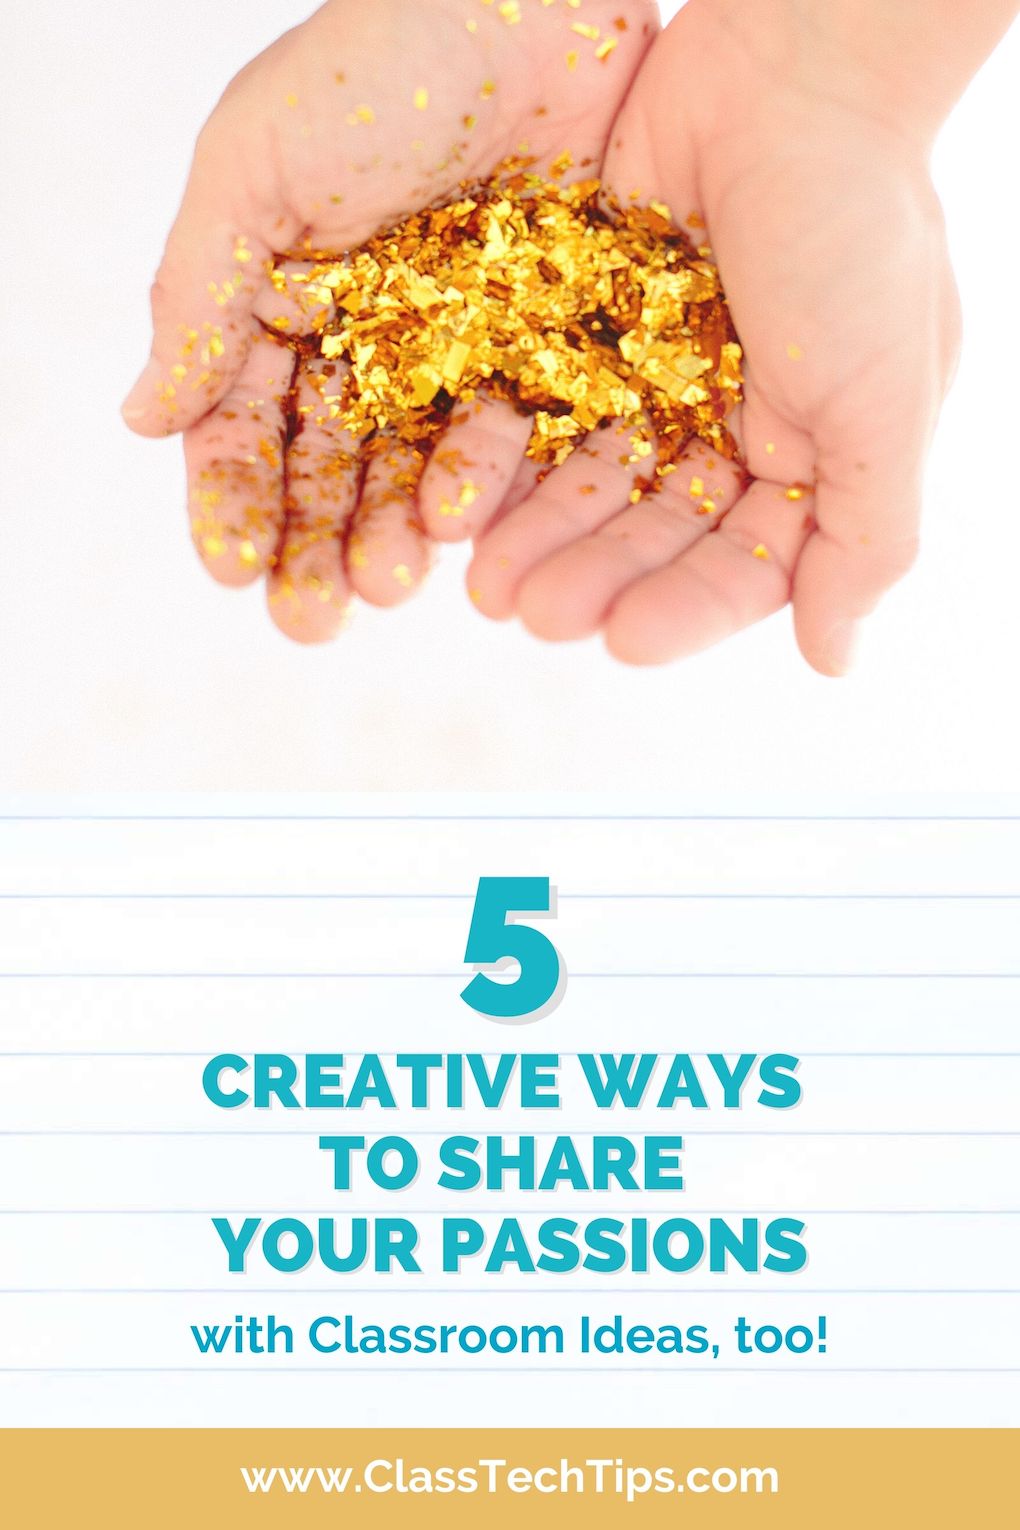 Explore this list of five creative ways to share your passions along with creative classroom ideas featuring lots of activities for students.